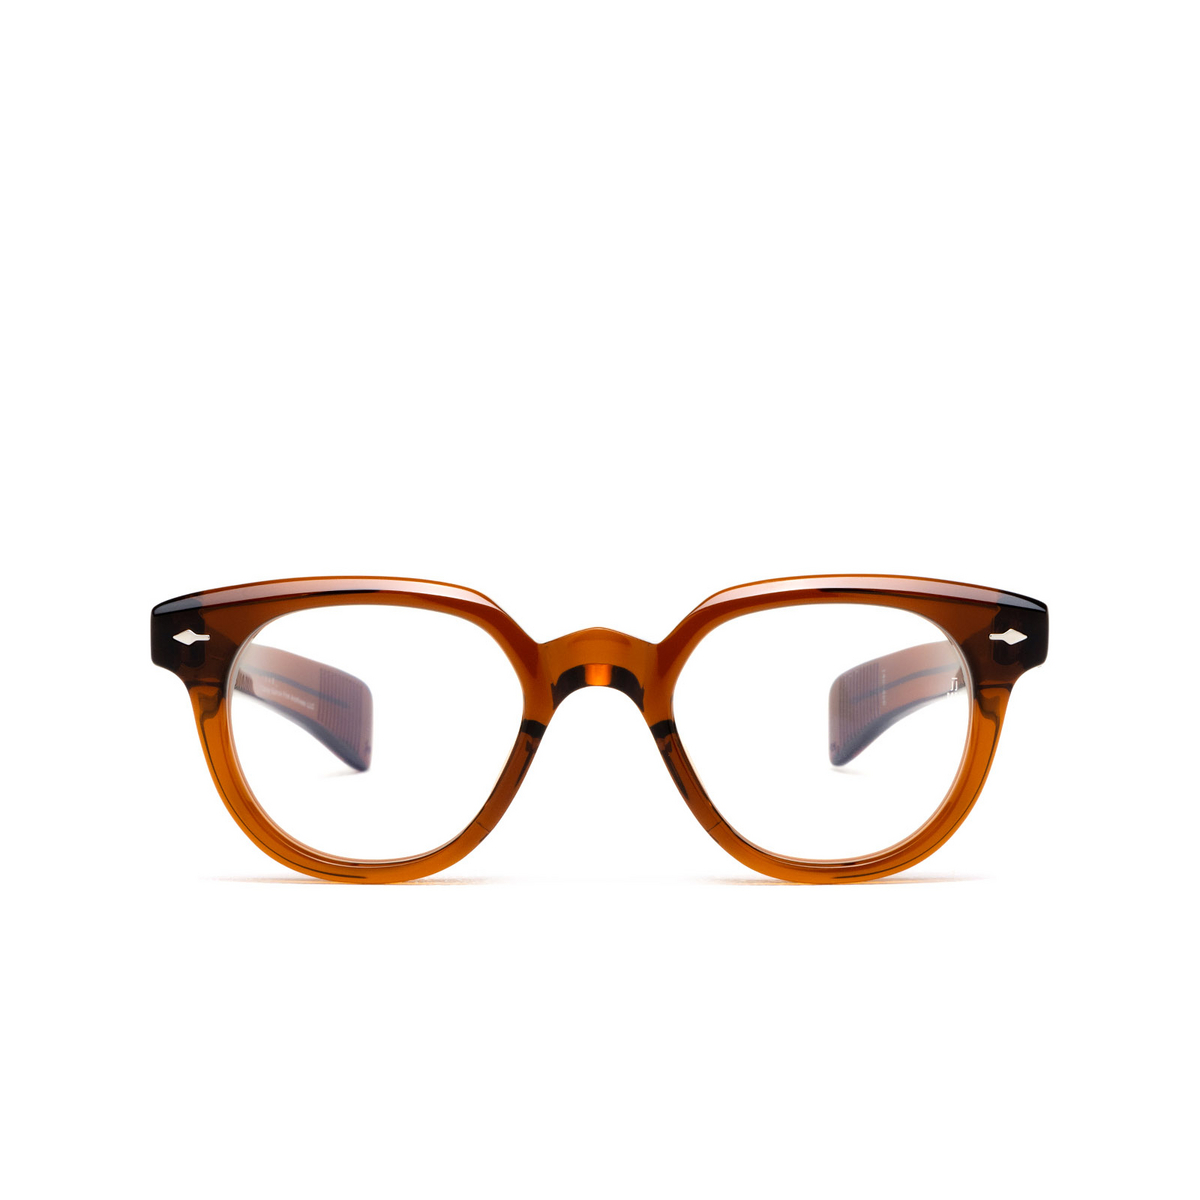 Jacques Marie Mage 1948 Eyeglasses HICKORY - front view